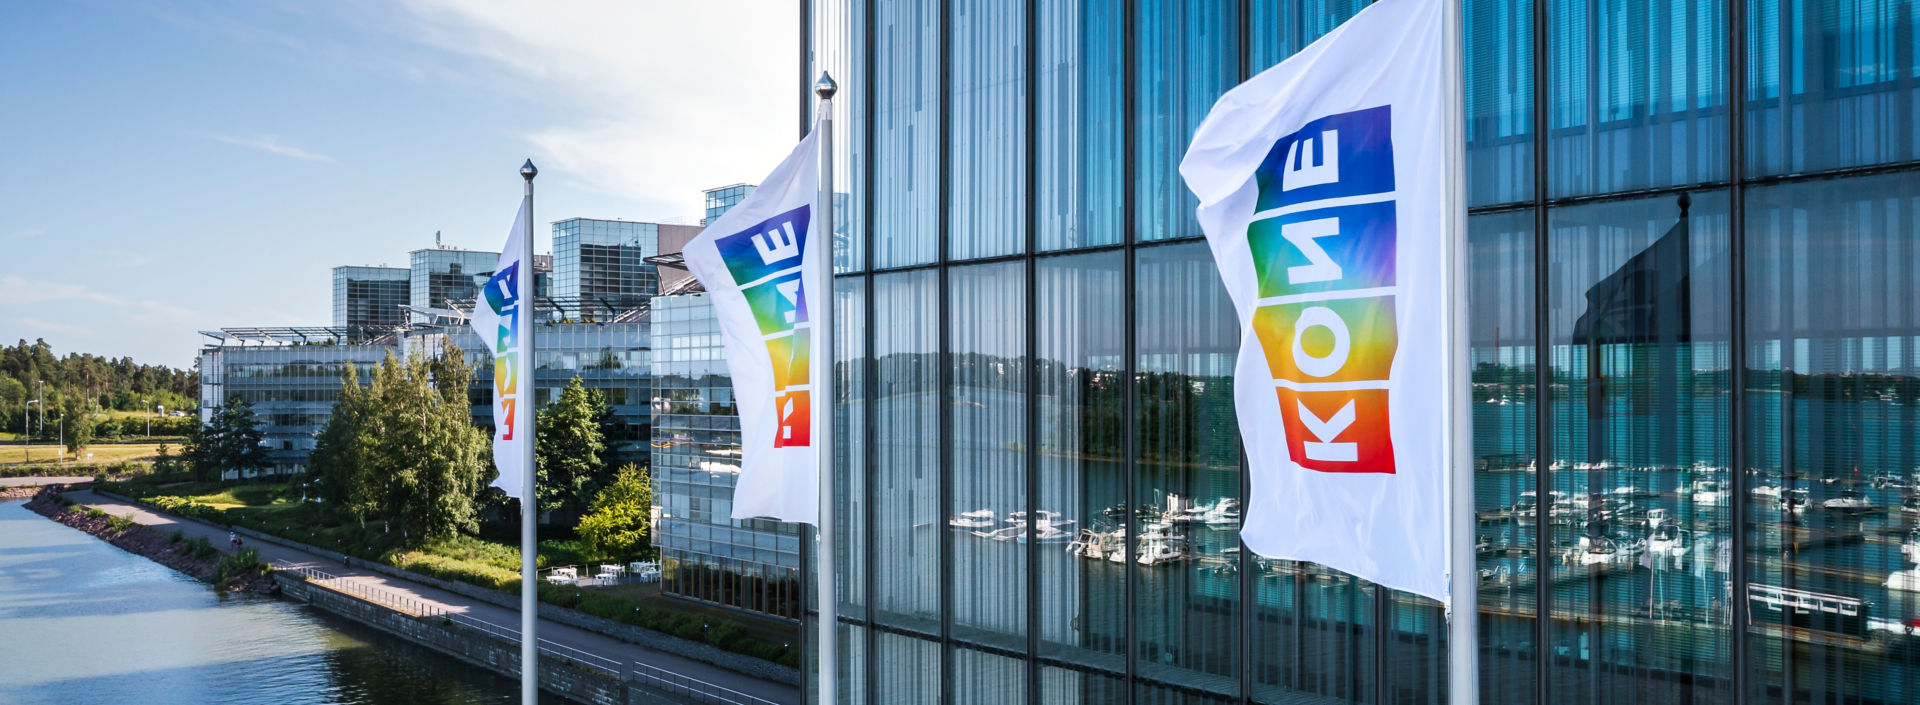 KONE Building in Finland with Pride flags